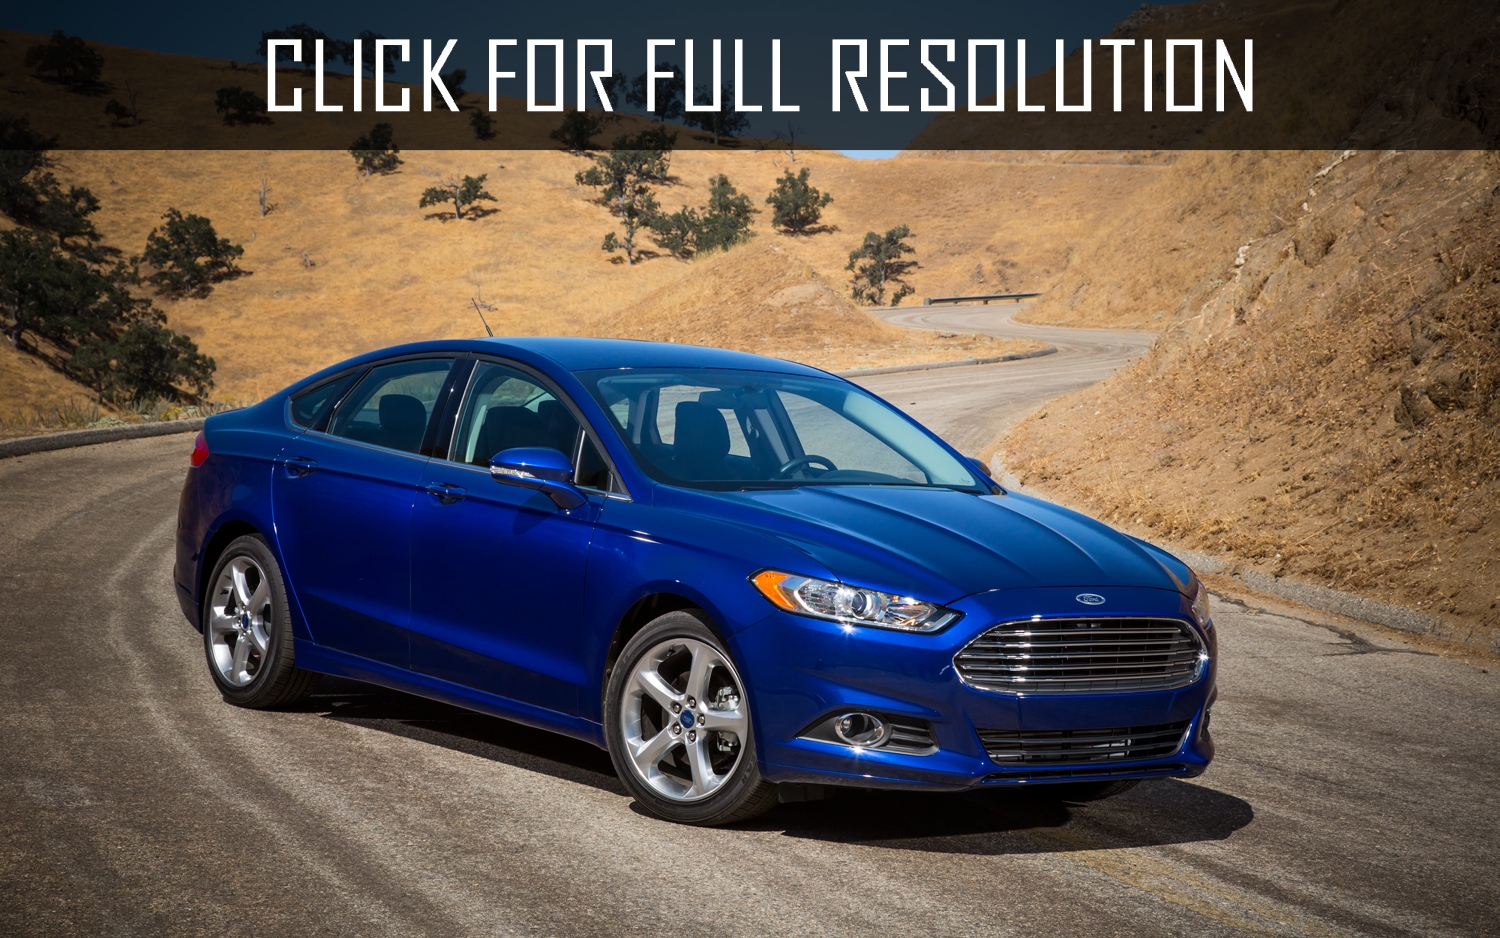 Ford Fusion 2014 Blue